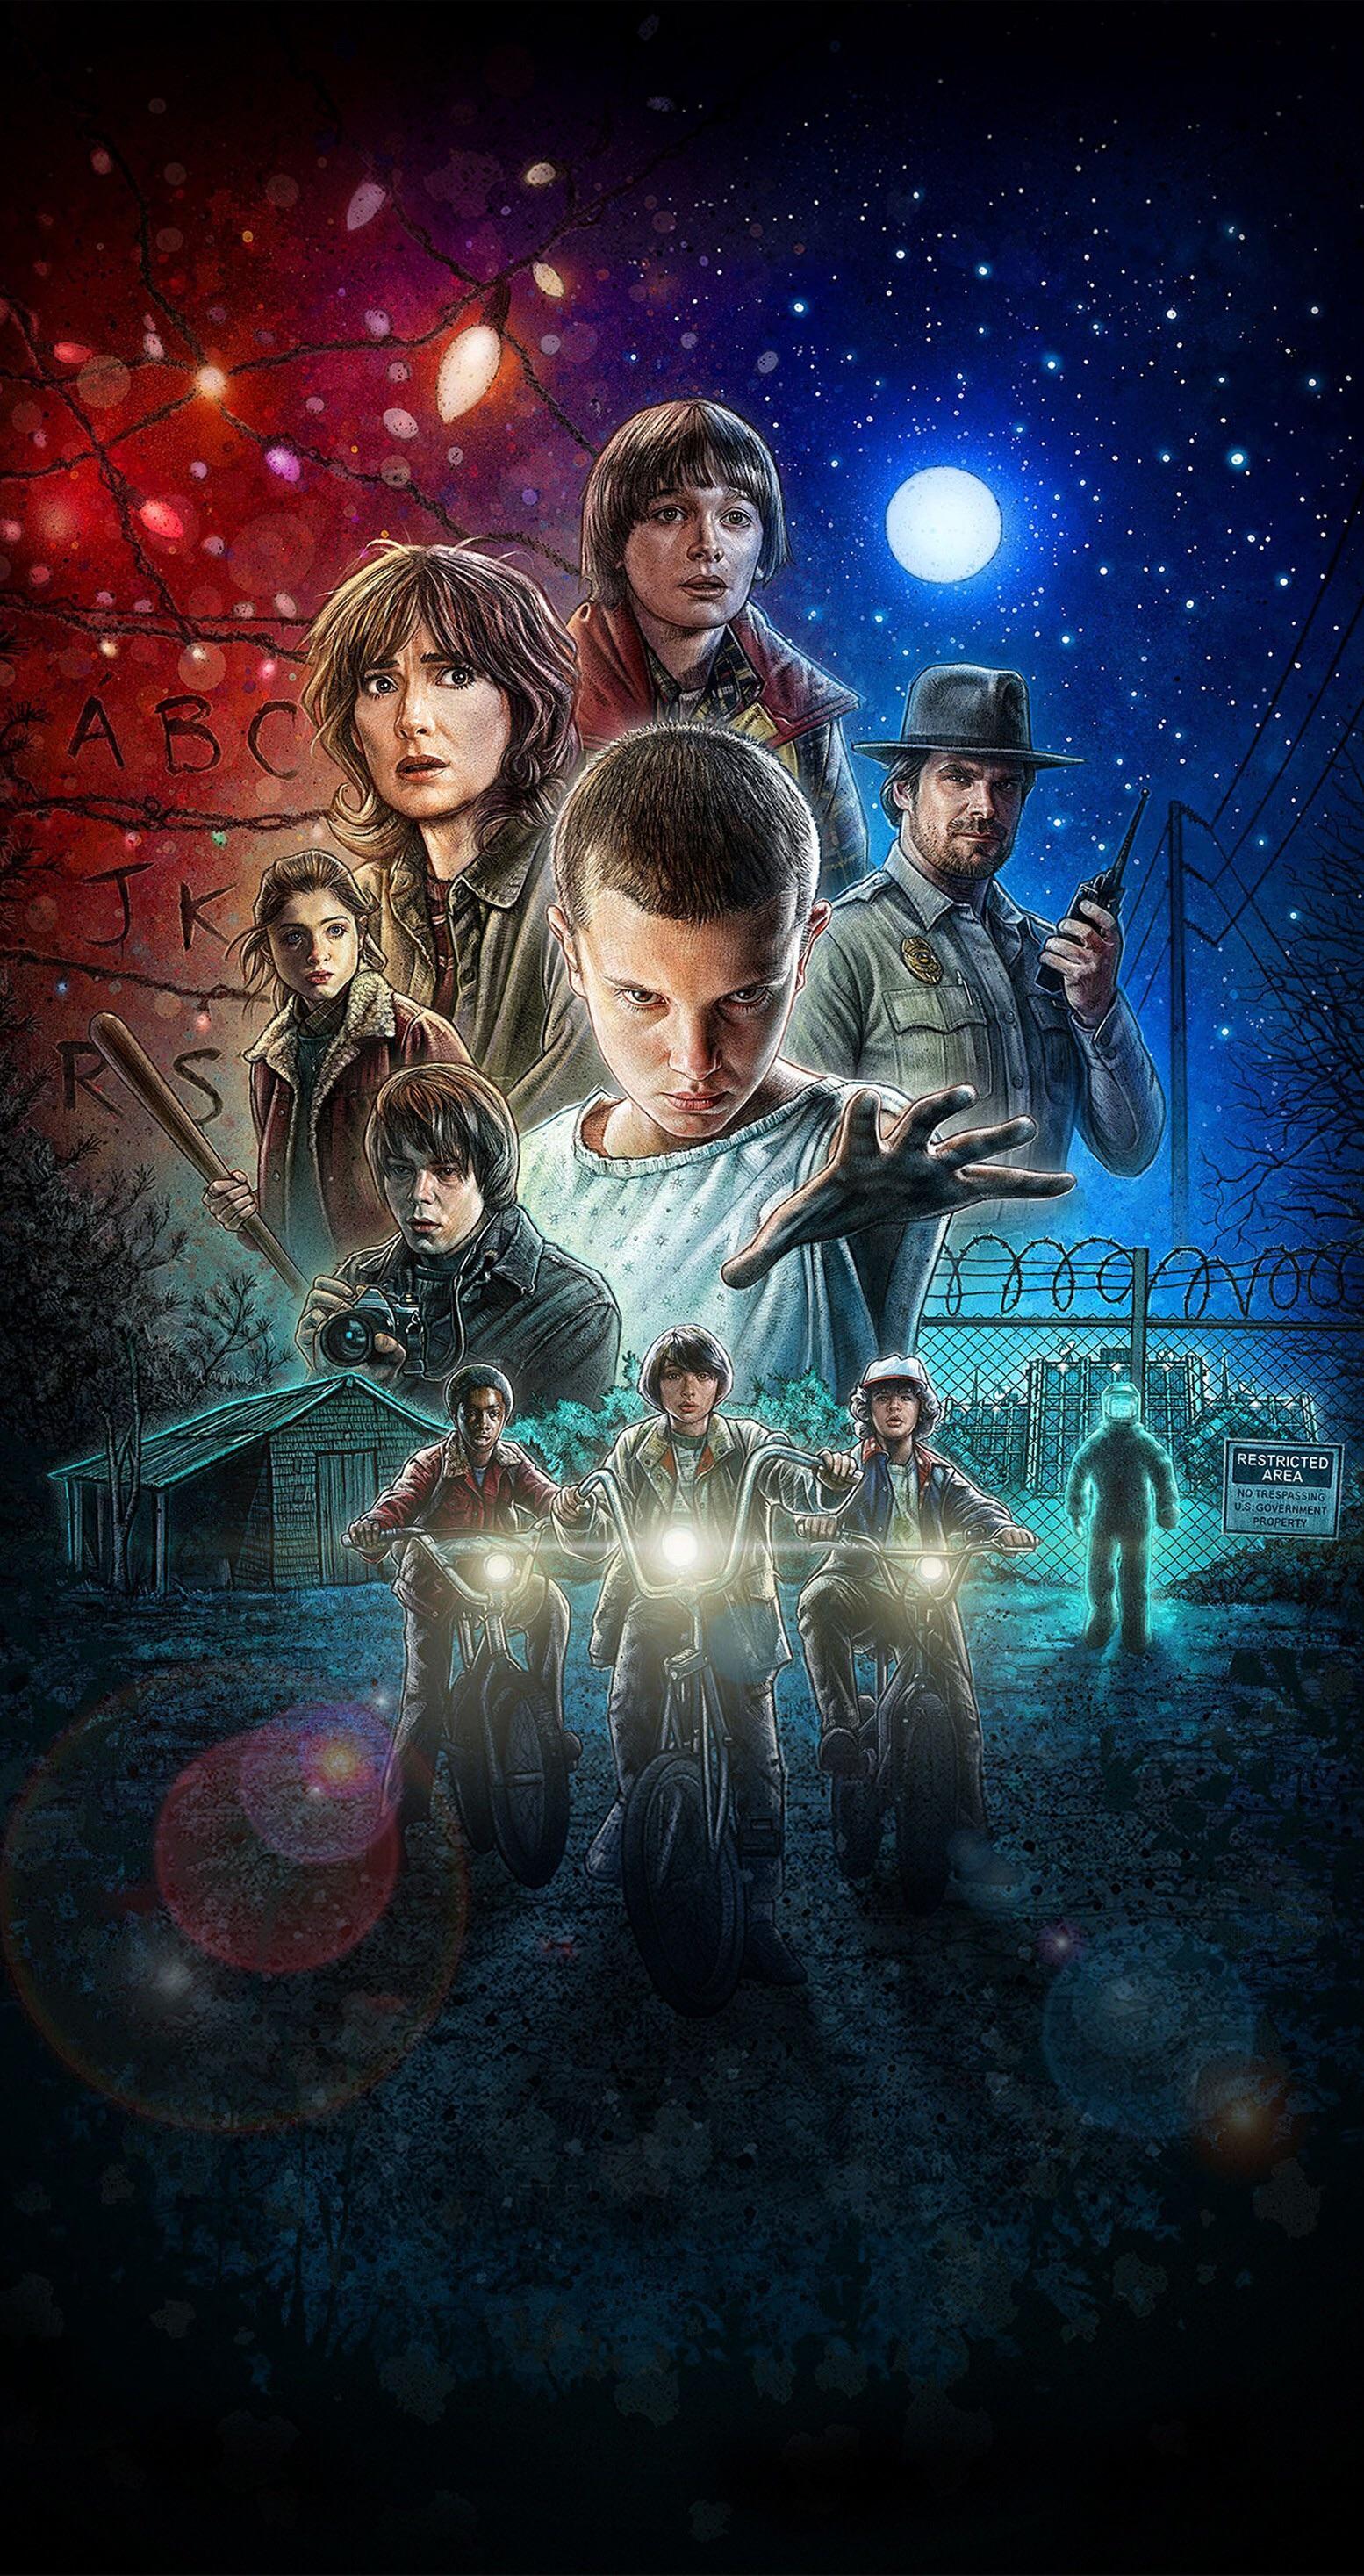 Amazing stranger things wallpaper for the iPhone X